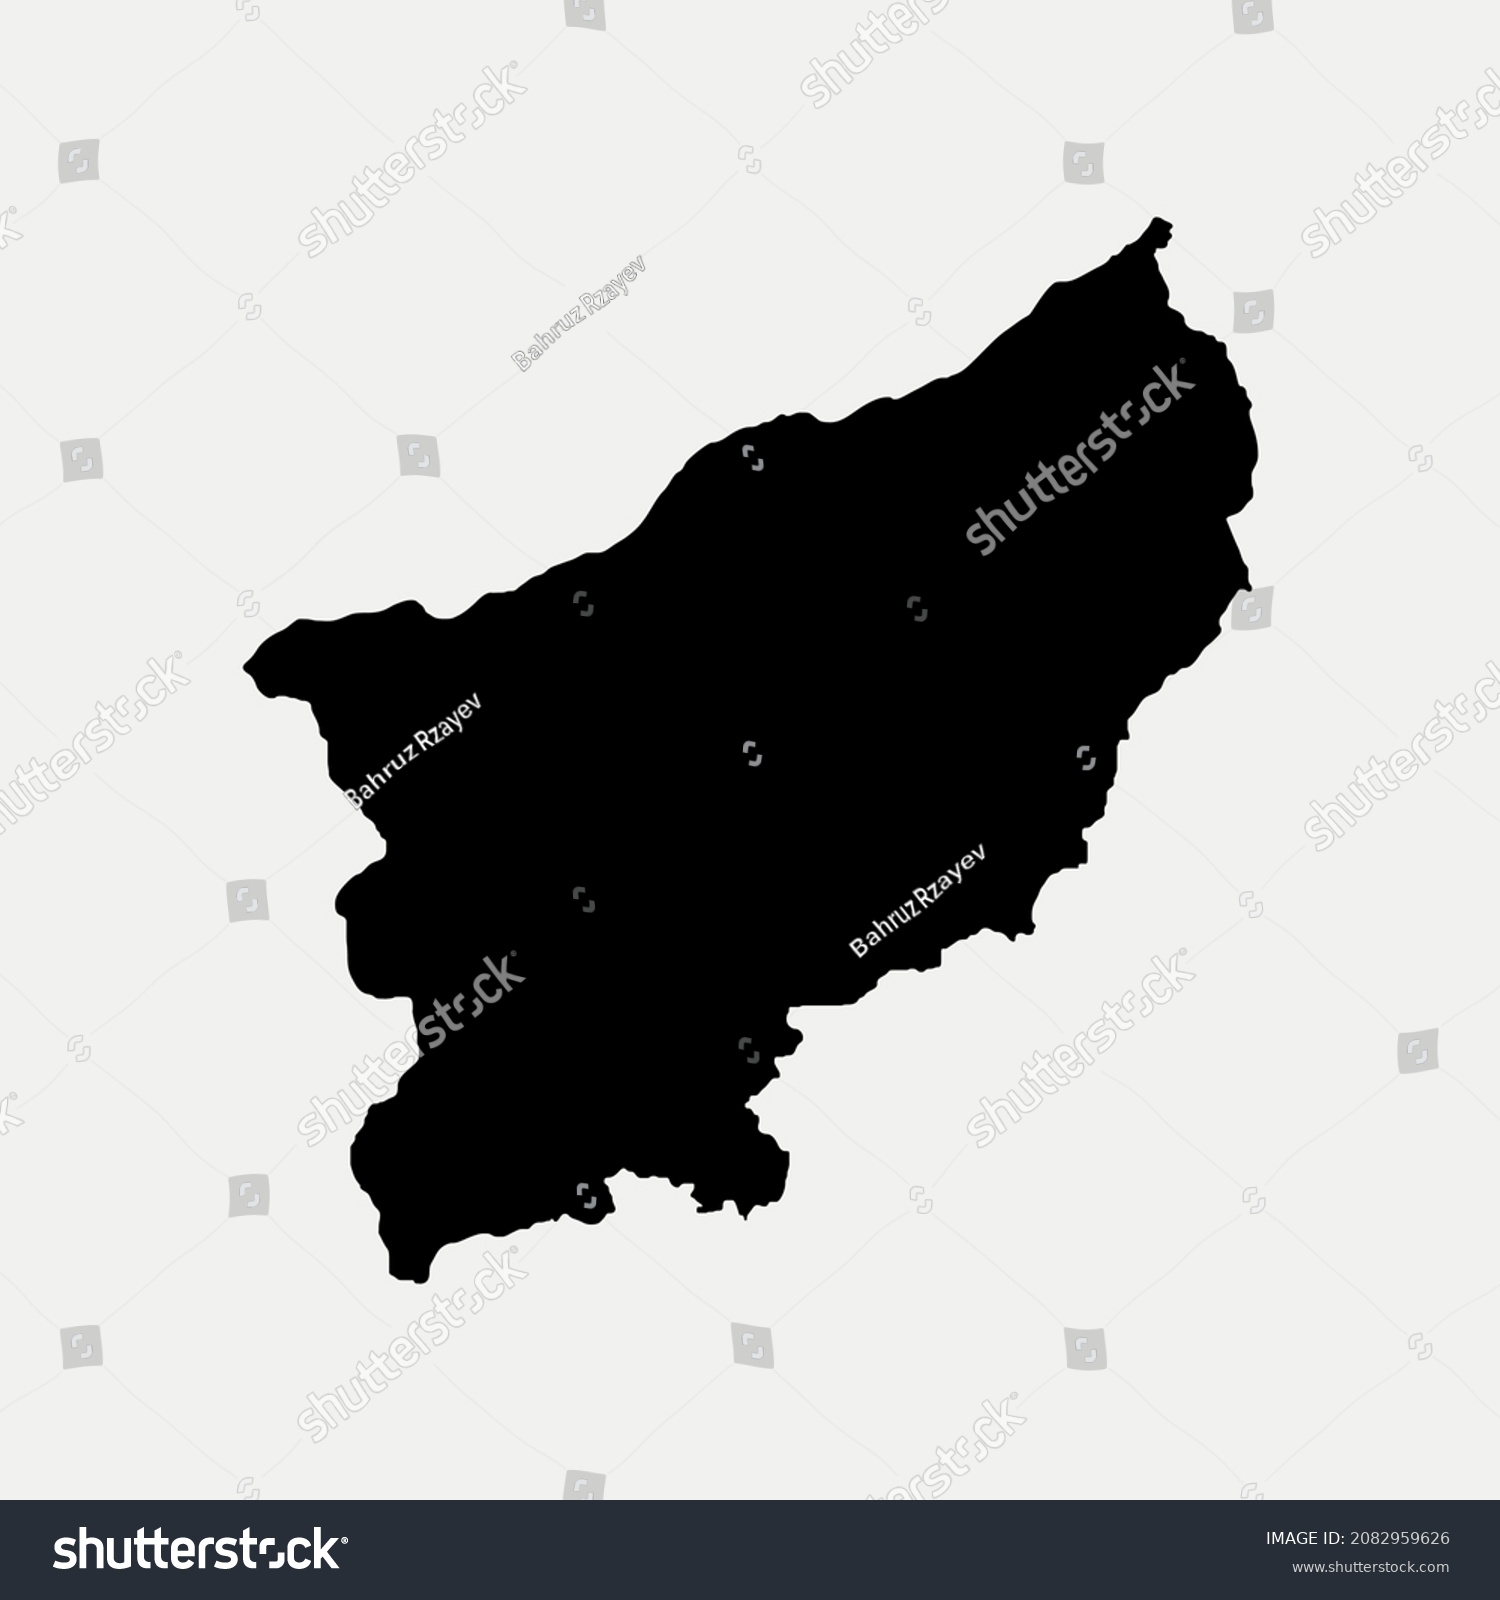 Map of Rize - Turkey region outline silhouette vector illustration
 #2082959626